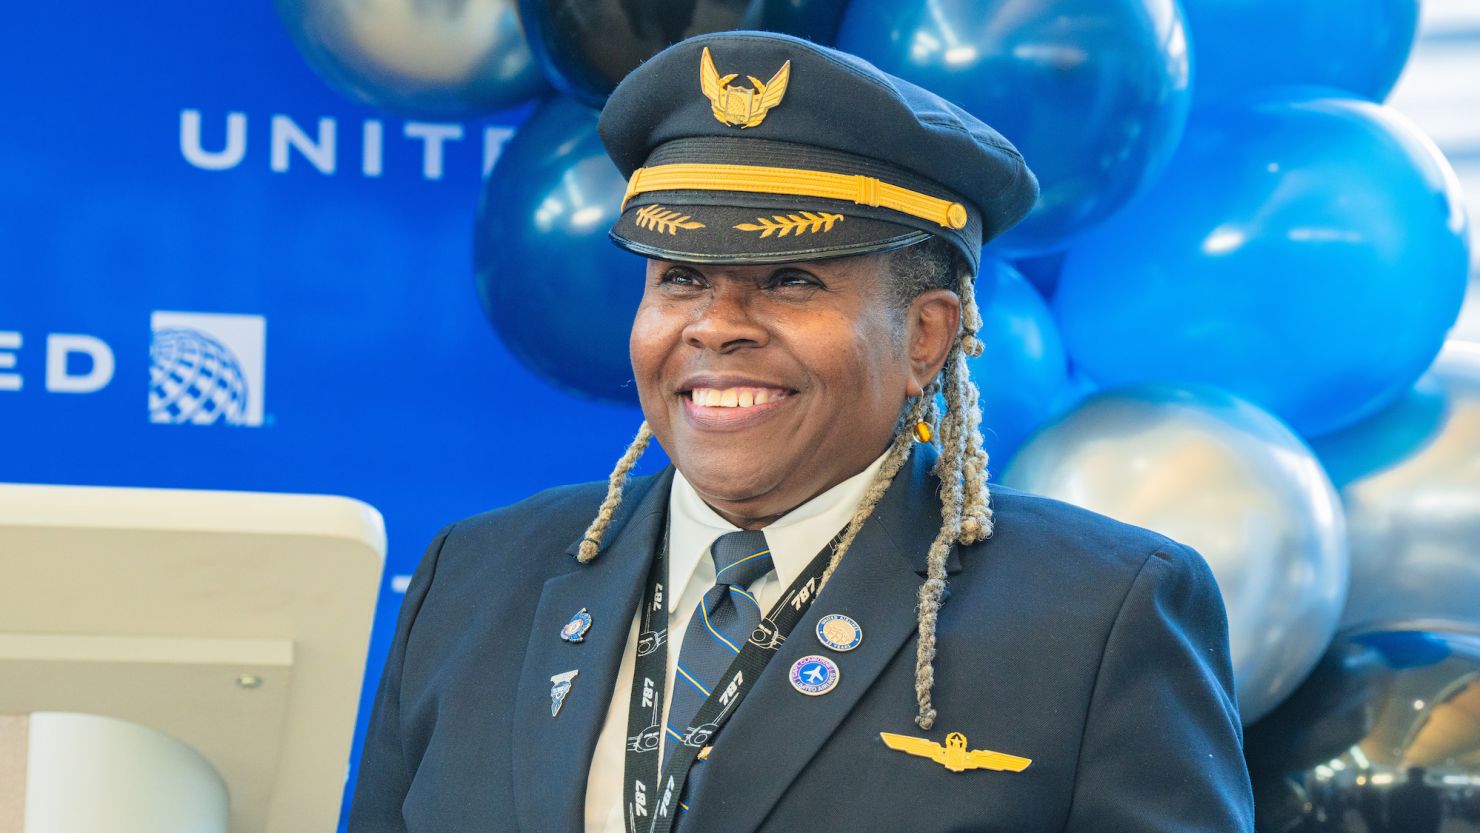 Captain Theresa Claiborne -- the first Black woman to fly in the US Air Force -- is retiring from United Airlines